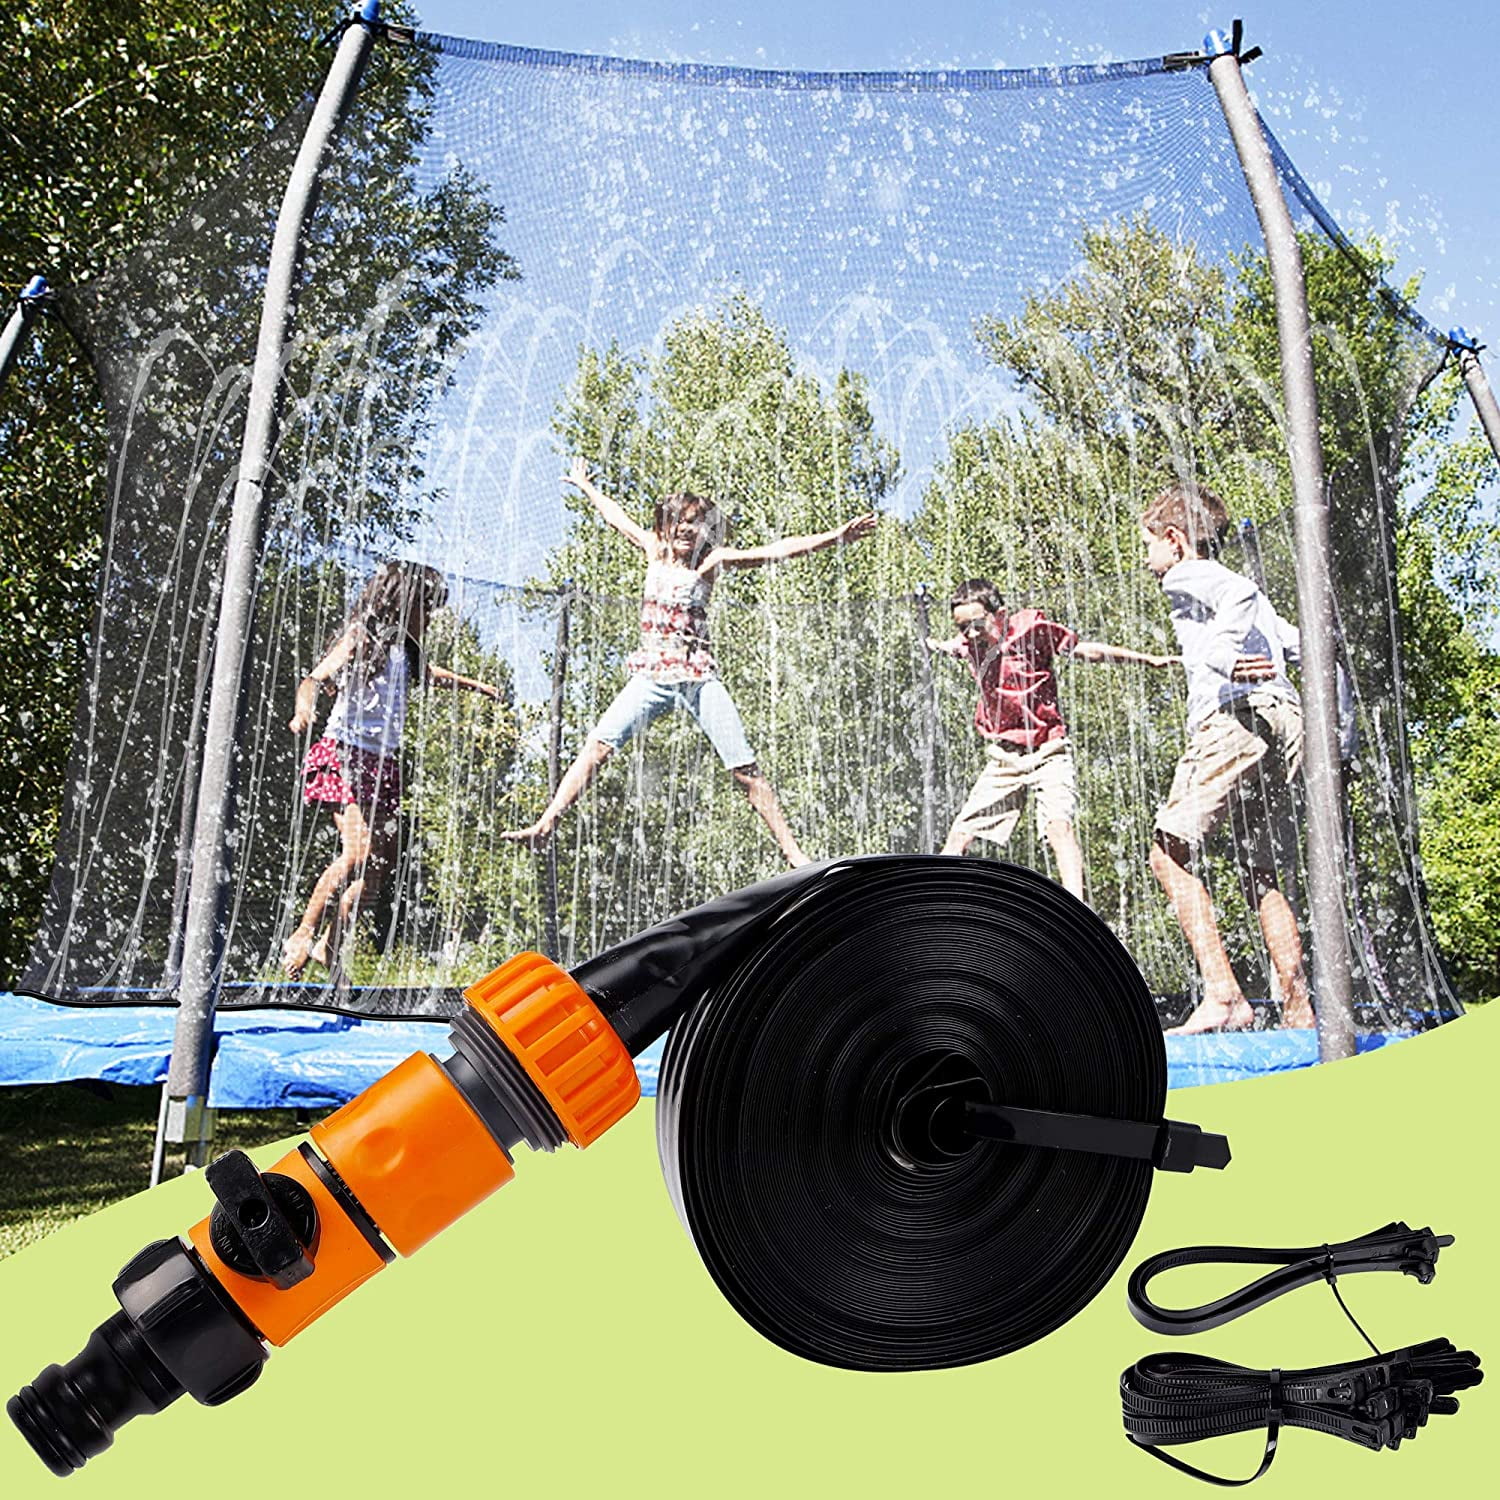 Trampoline Sprinkler for Kids - Outdoor Trampoline Water Sprinkler for Kids and Adults, Trampoline Accessories Sprinkler 39ft Long for Water Play, Games, and Summer Fun in Yards